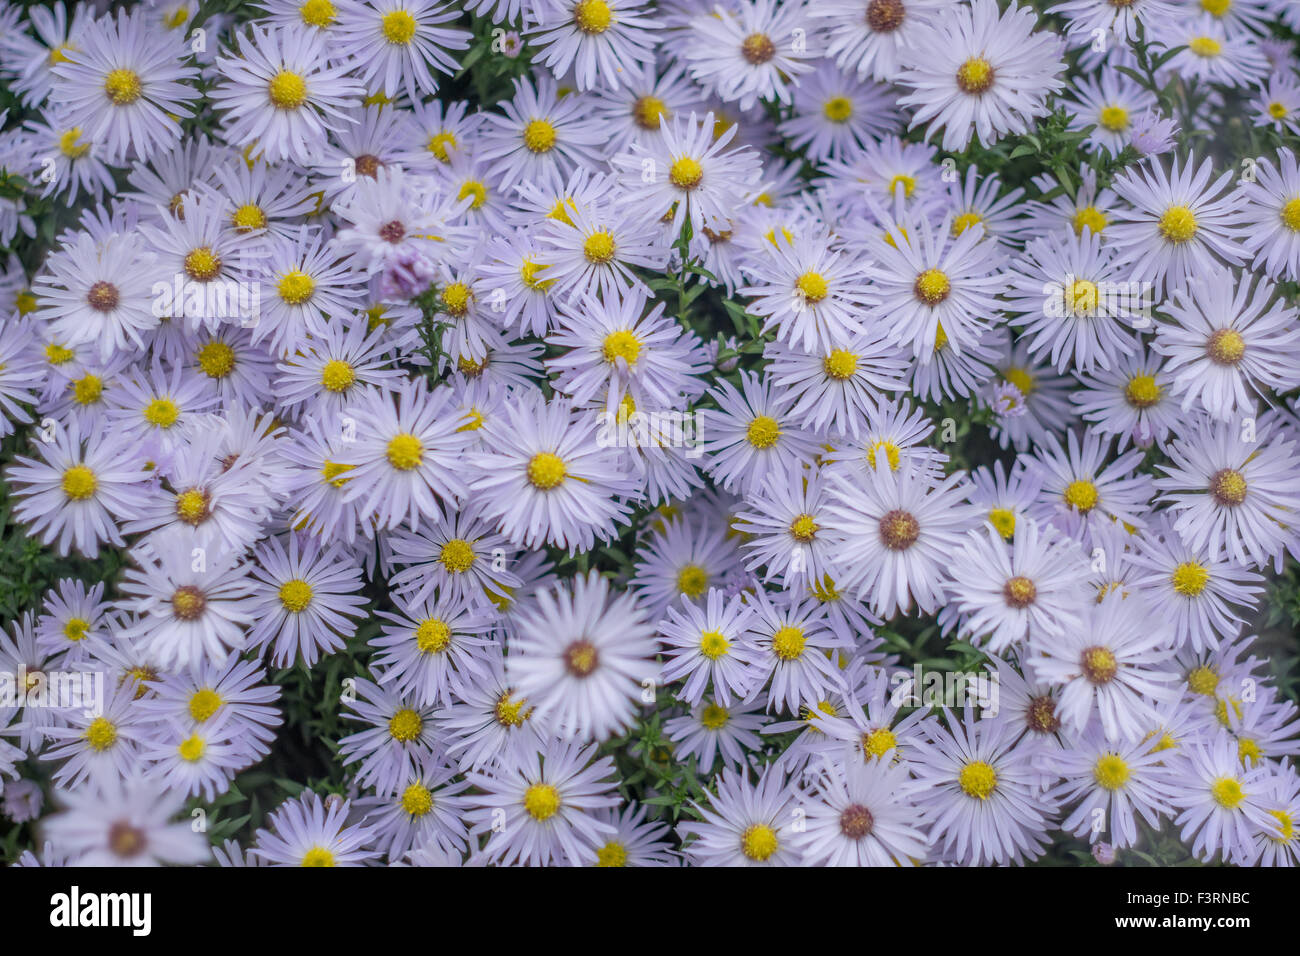 Lots of pale purple autumn aster flowers in full bloom Stock Photo